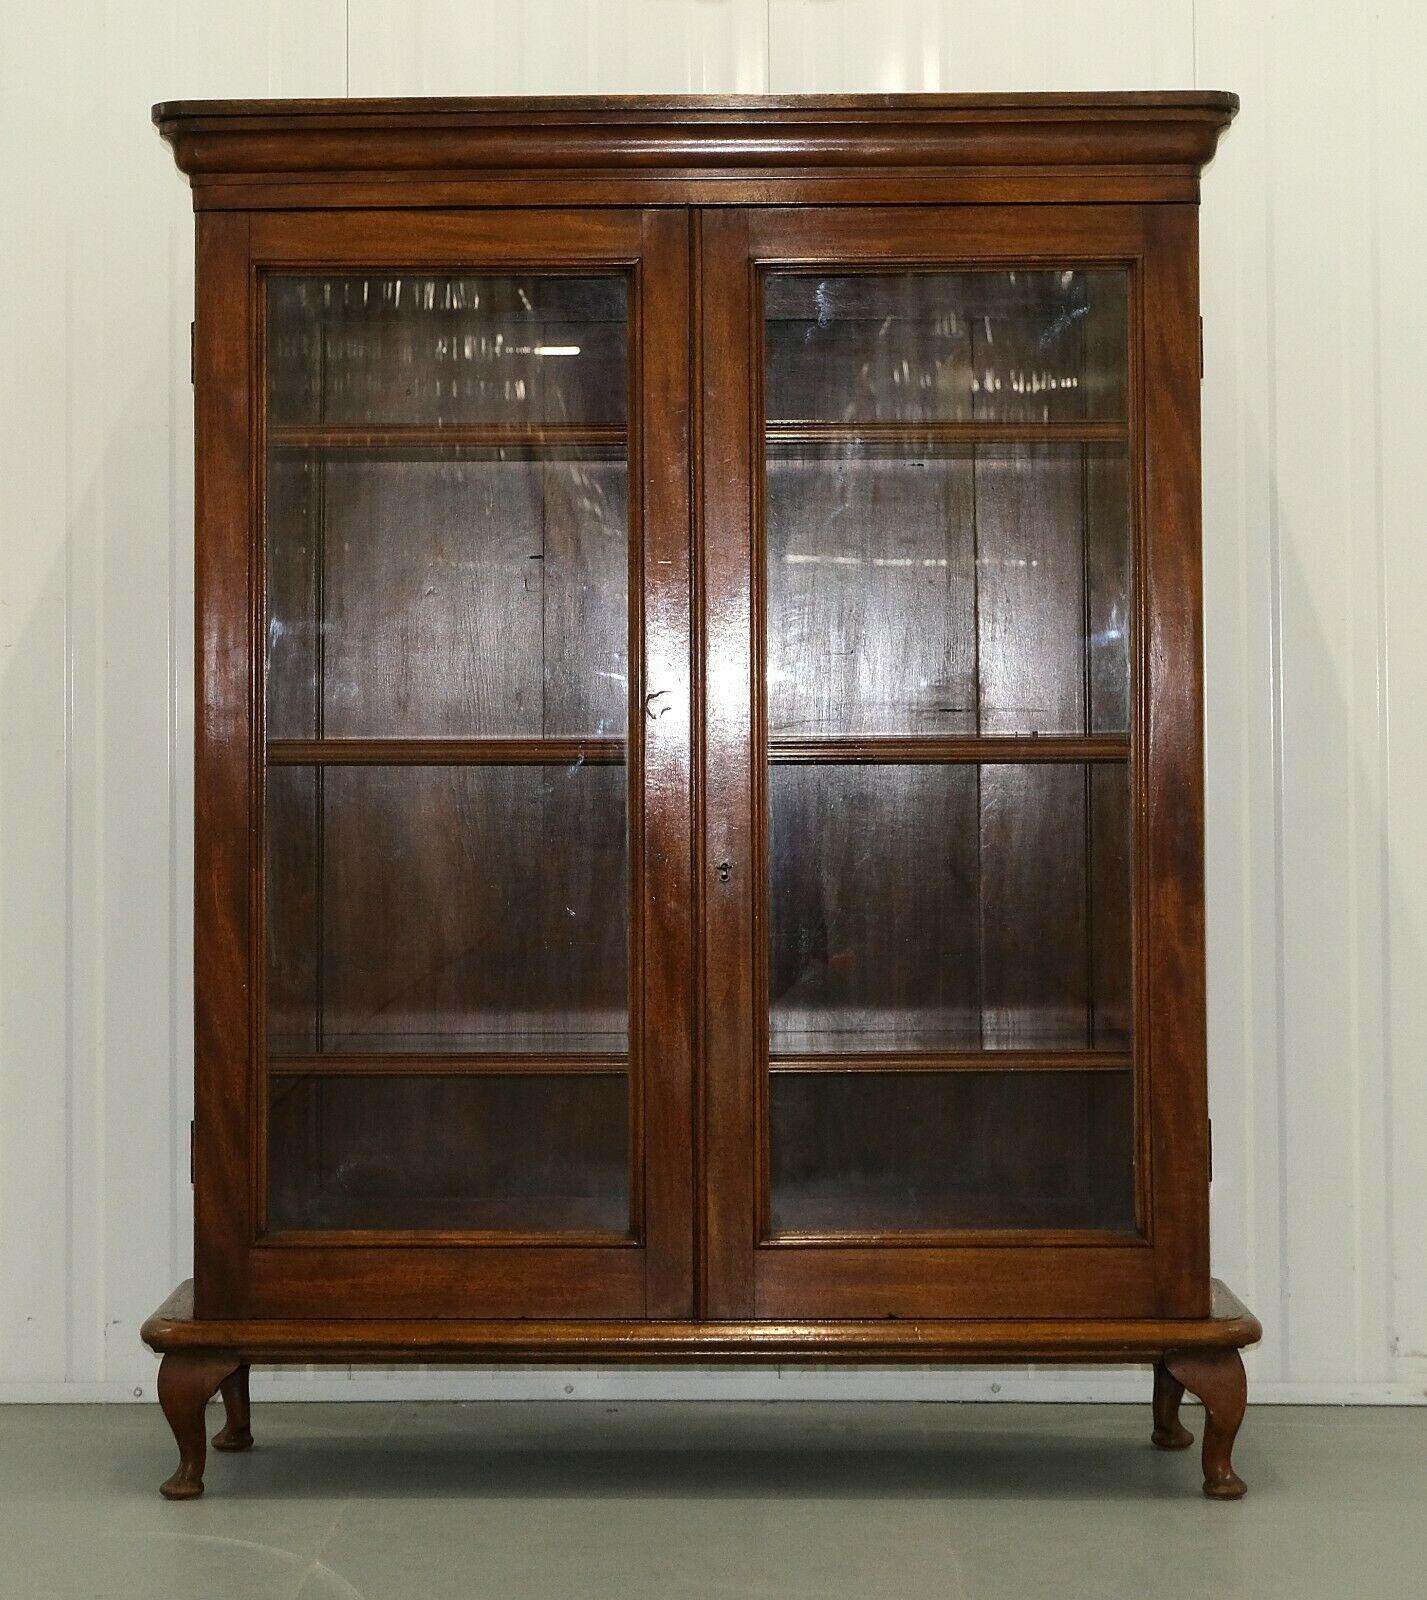 We are delighted to offer for sale this classic brown mahogany two doors bookcase on cabriole legs. 

This fine, elegant and practical bookcase/cabinet has a rich brown colour, standing on four cabriole legs. The solid adjustable shelves are ideal